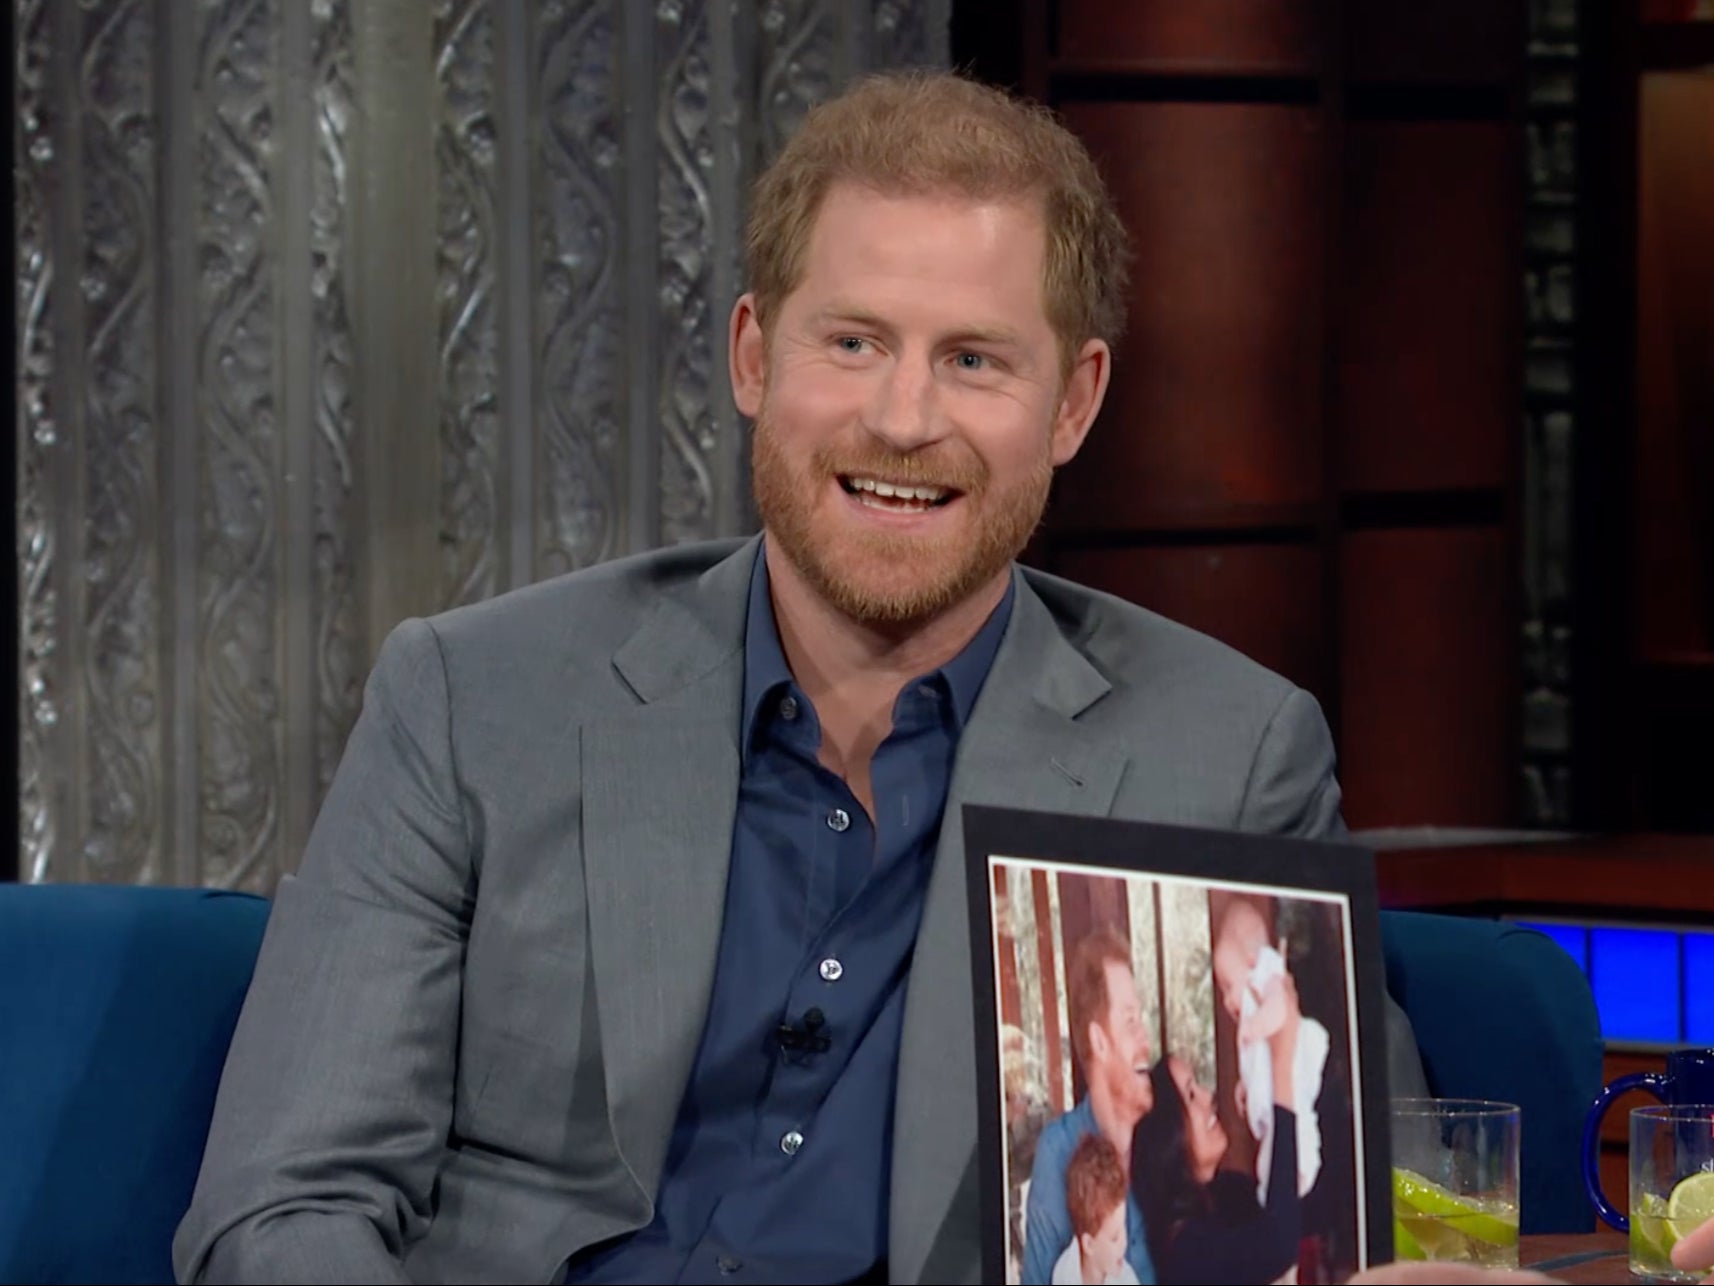 Prince Harry on ‘The Late Show with Stephen Colbert’